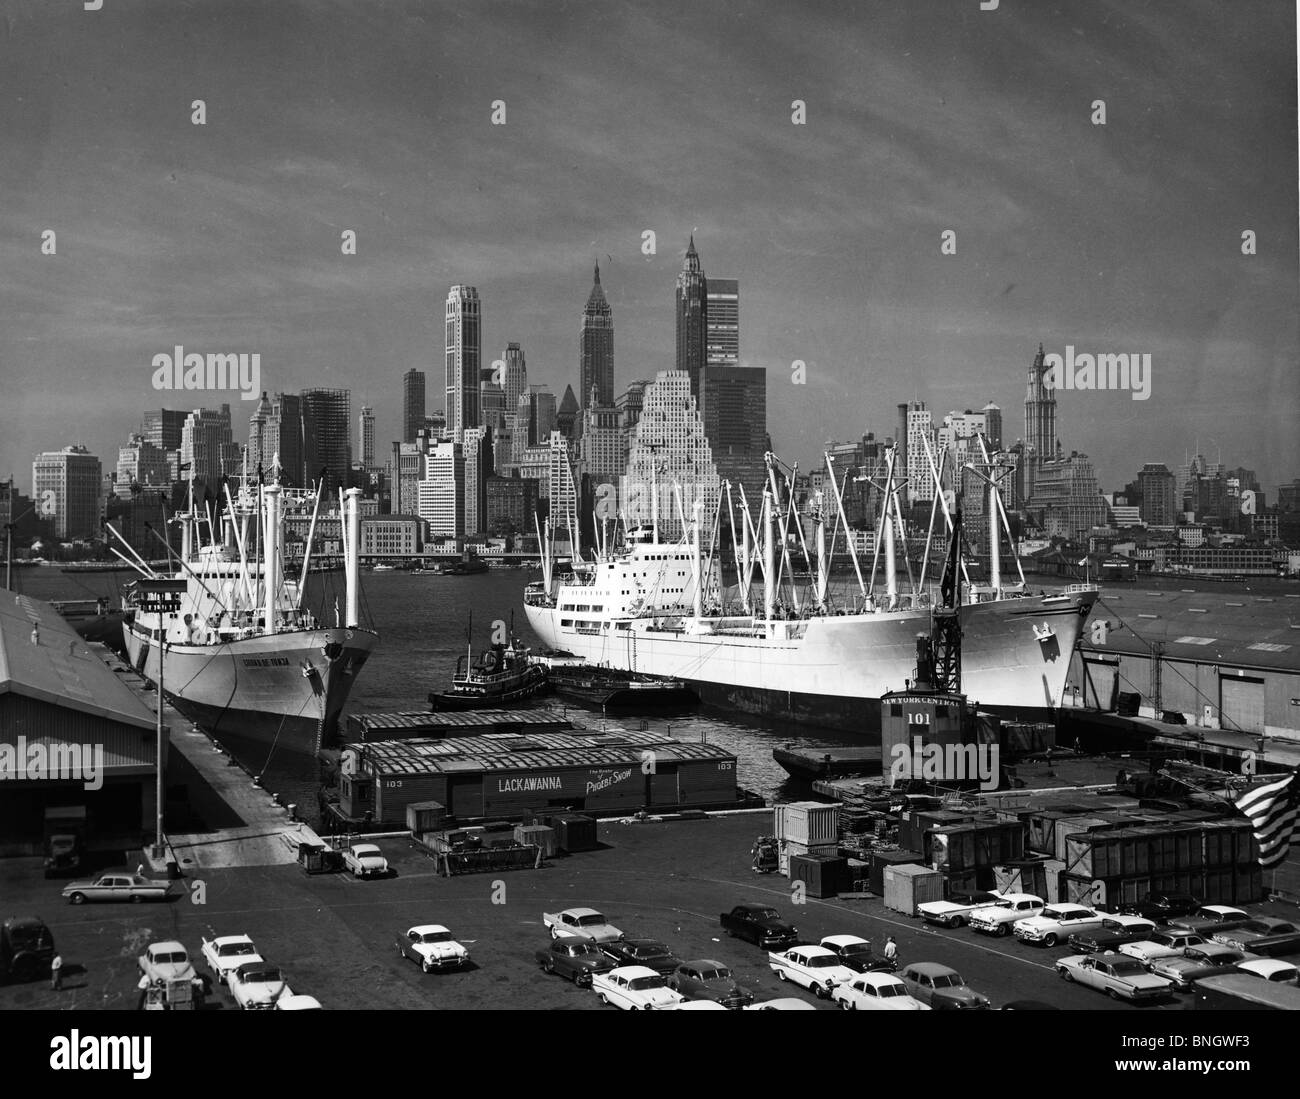 USA, New York, New York City, container ships at commercial dock, 1970s Stock Photo